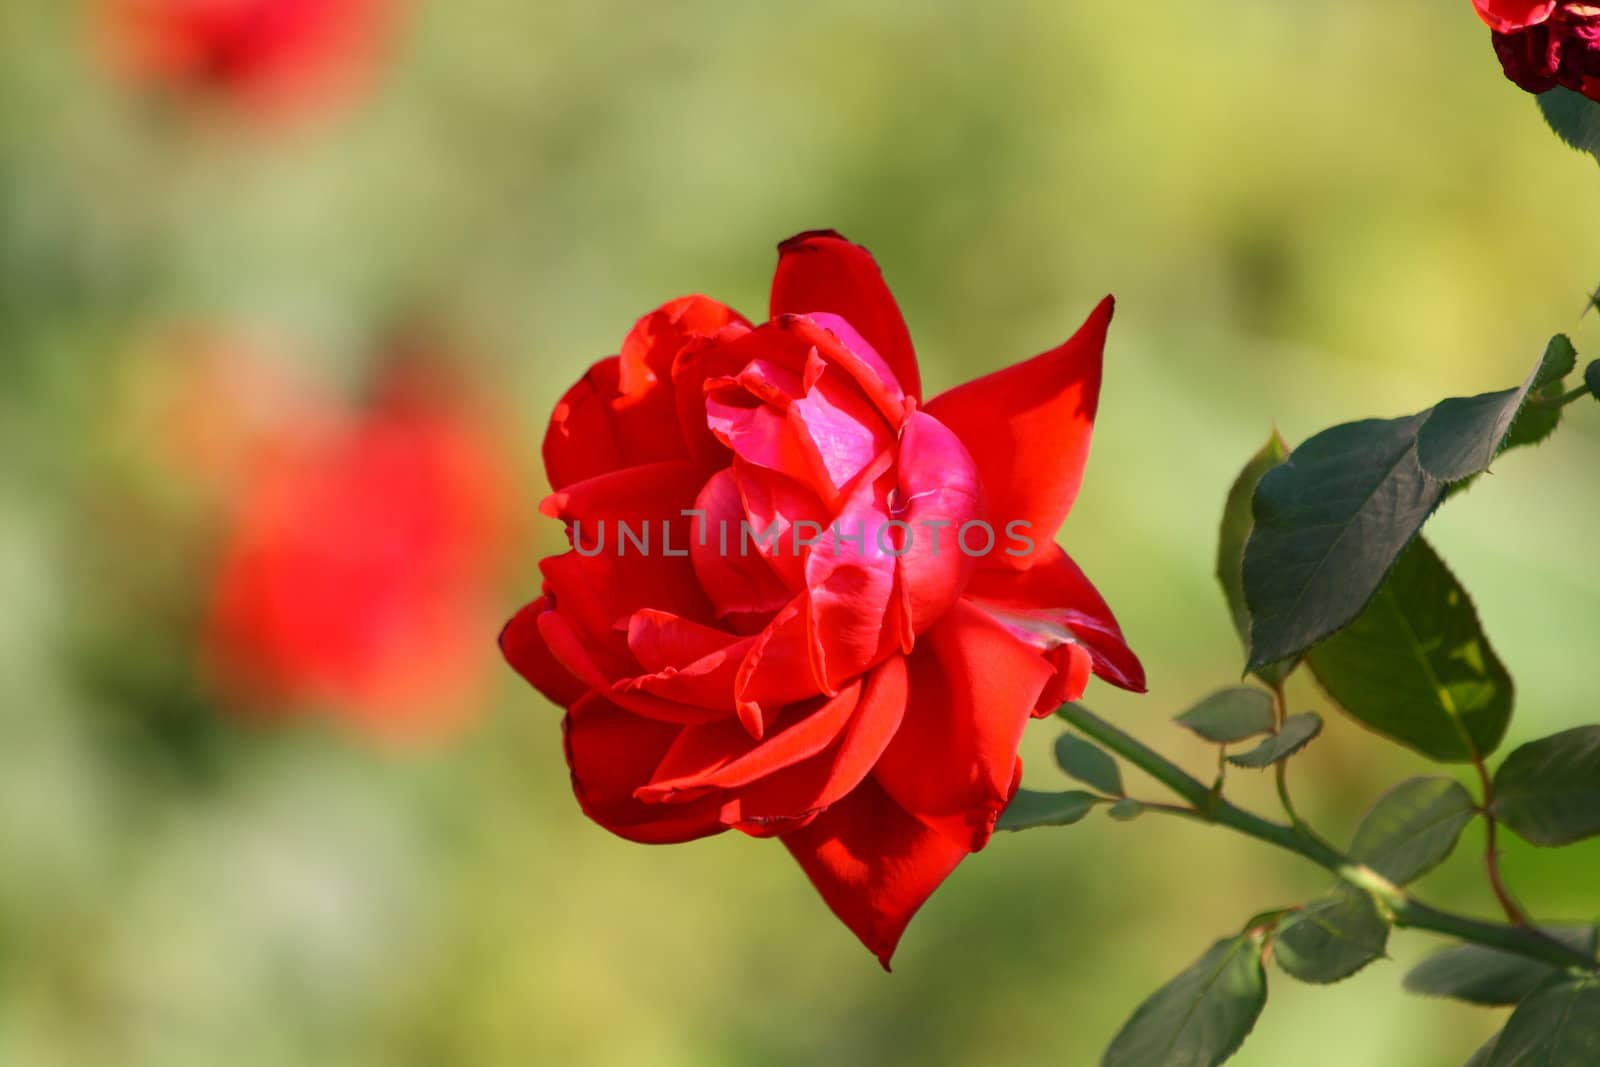 Close up of the scarlet colored rose